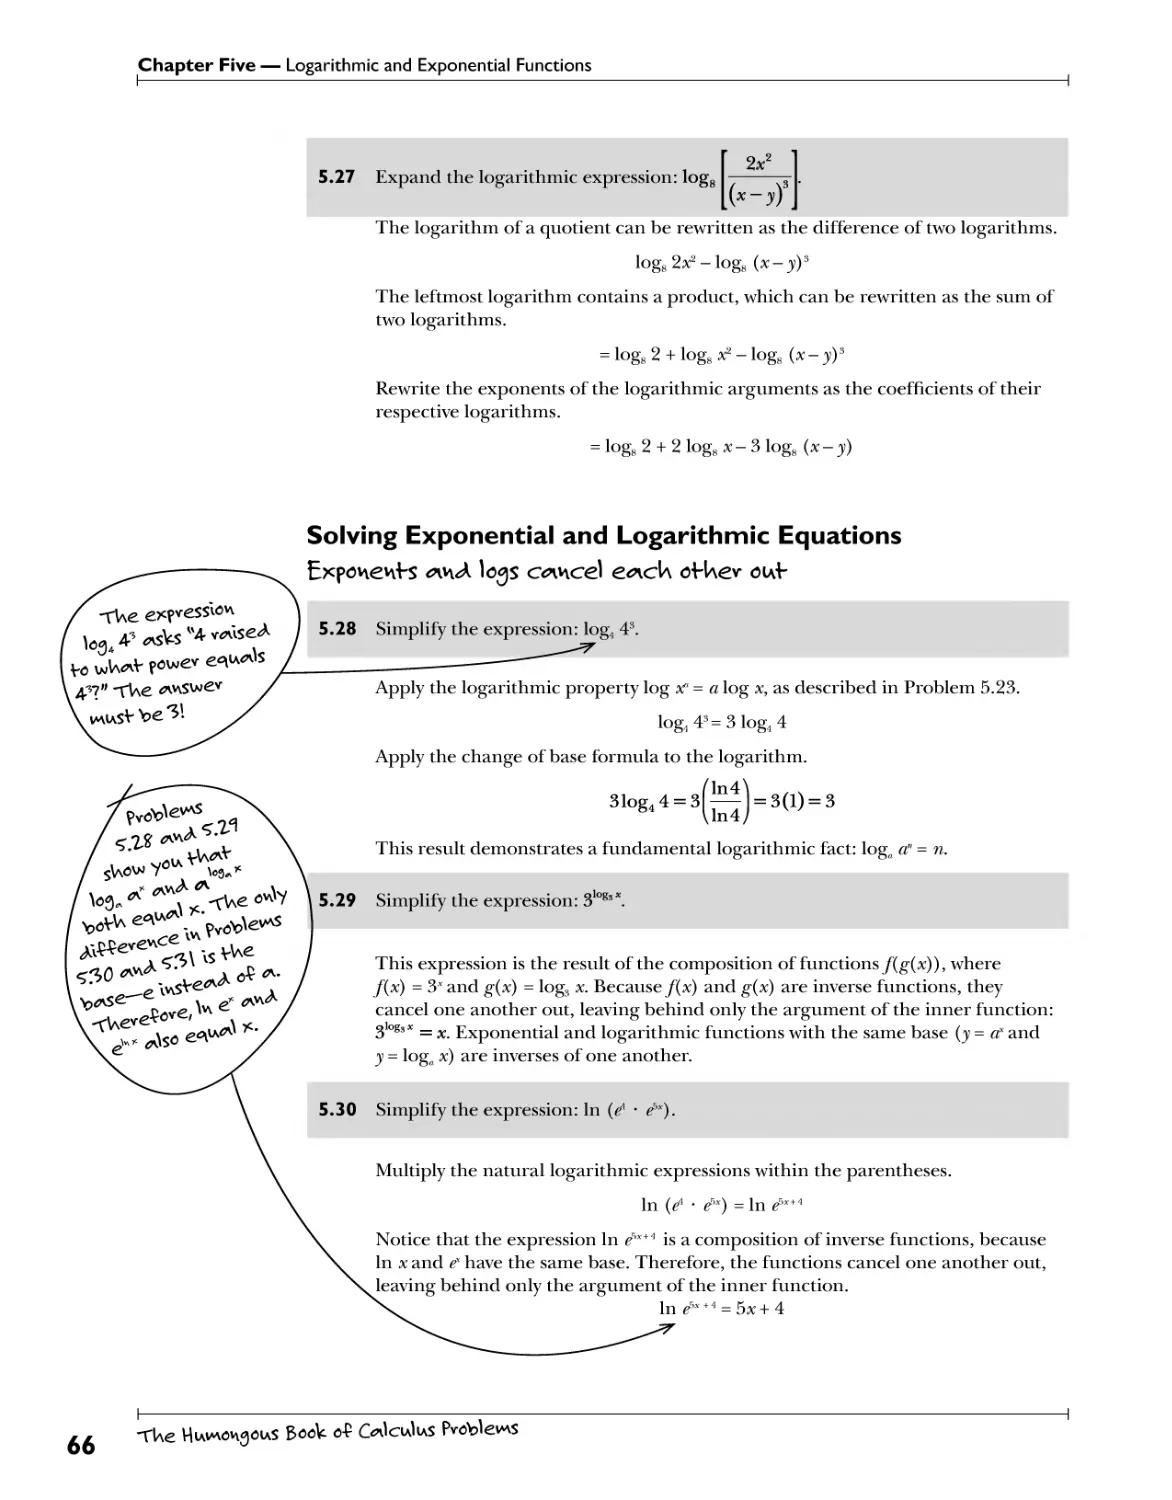 Solving Exponential and Logarithmic Equations 66